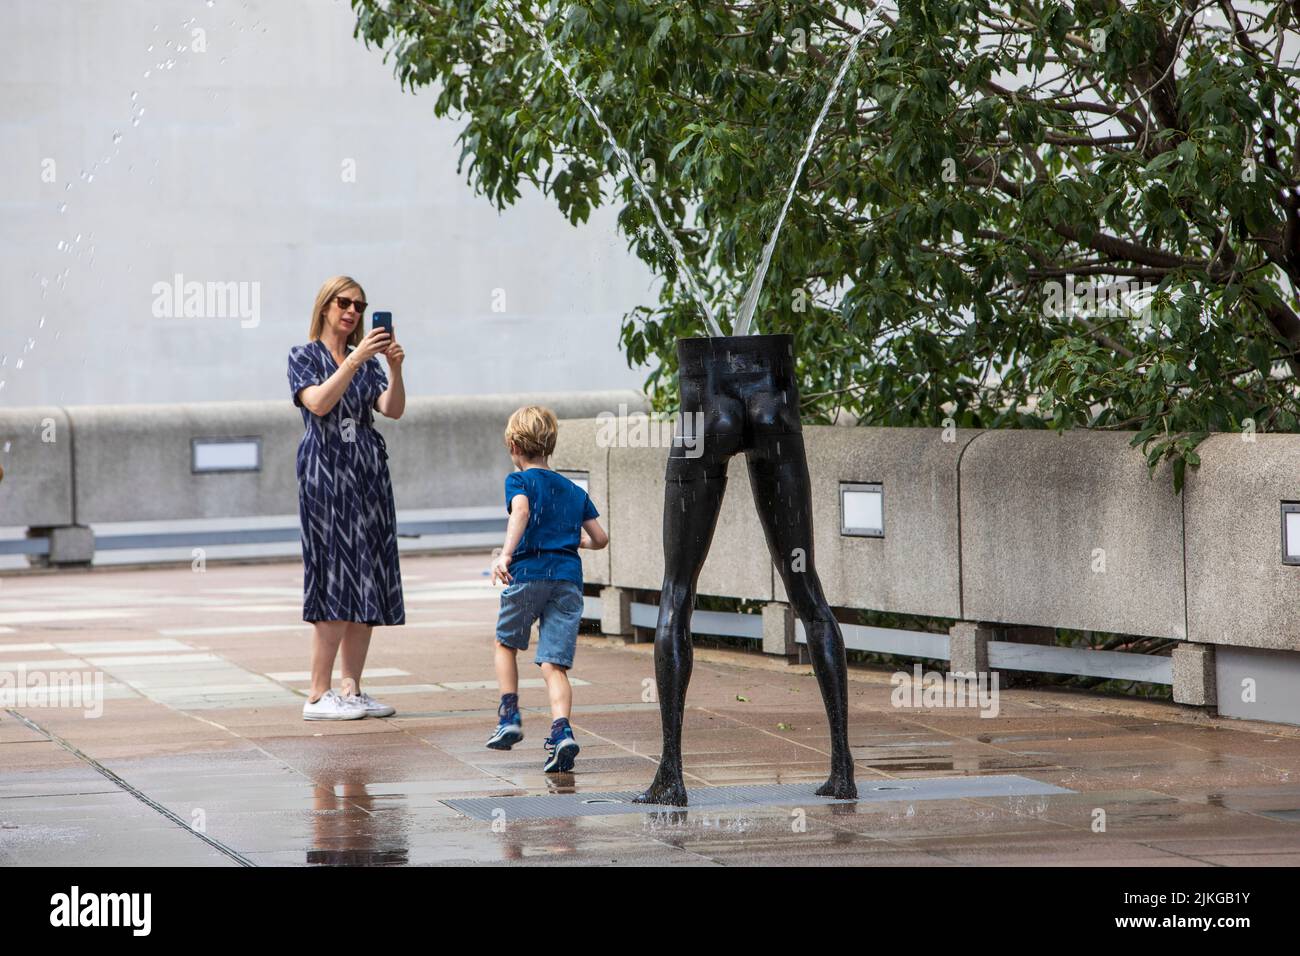 Sculpture outside the Hayward Gallery, Southbank, London, UK. Stock Photo